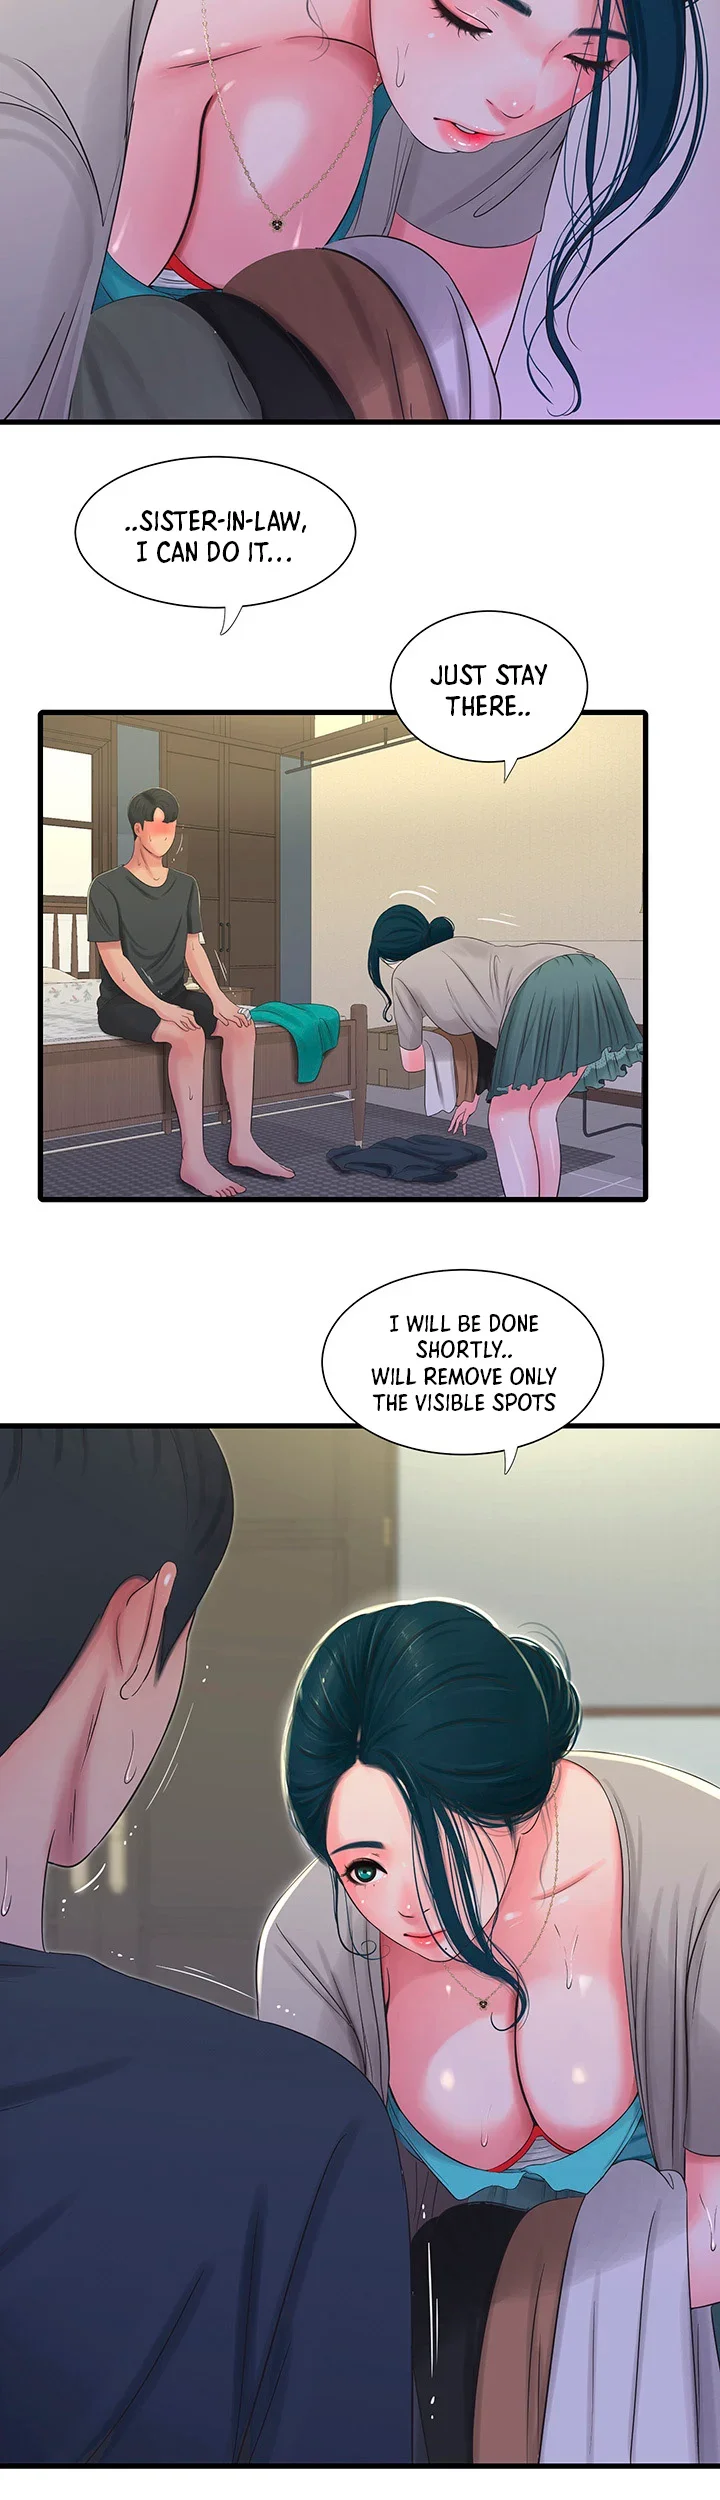 maidens-in-law-chap-33-22